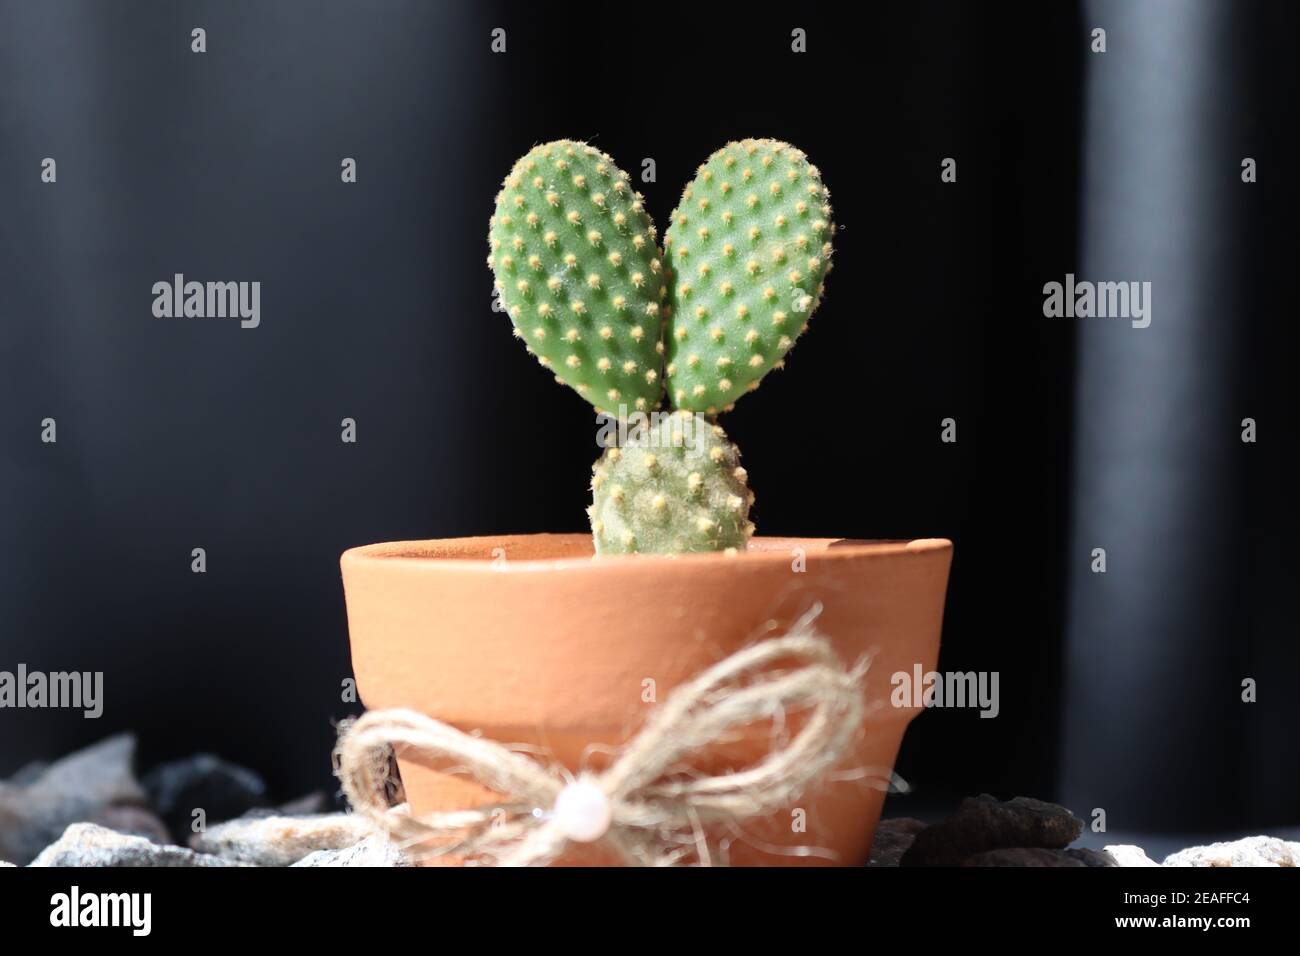 This small cactus tree with two leaves standing in front of various backgrounds shows us a cute look. It is in a tiny clay pot. Stock Photo